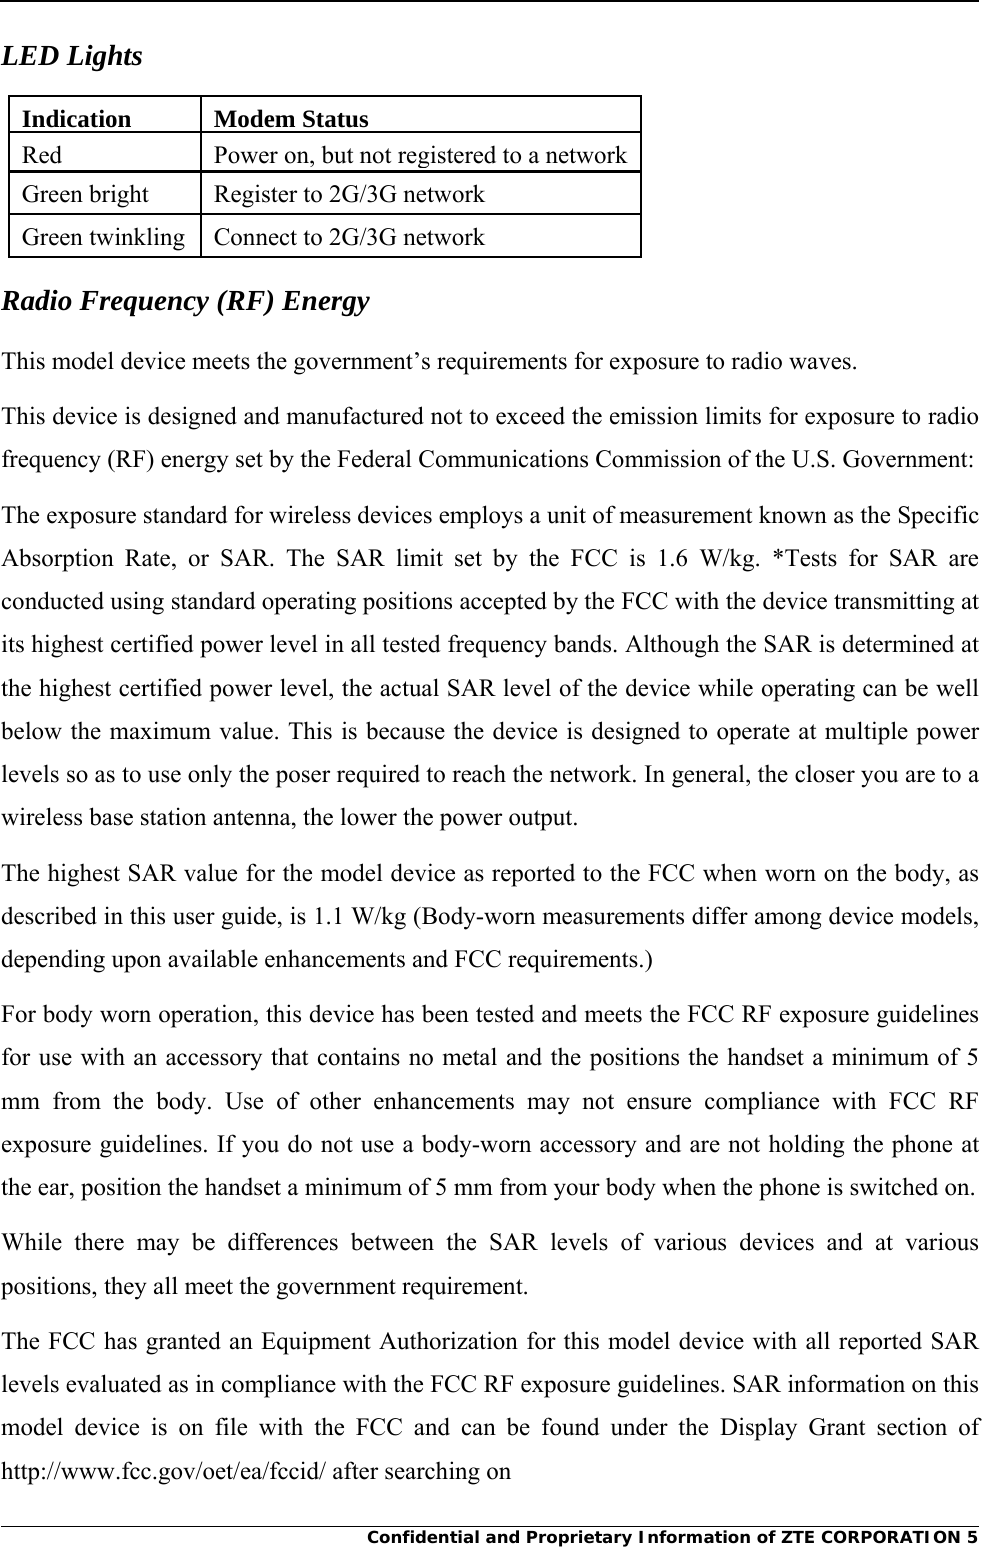     Confidential and Proprietary Information of ZTE CORPORATION 5LED Lights Indication Modem StatusRed  Power on, but not registered to a networkGreen bright  Register to 2G/3G network Green twinkling  Connect to 2G/3G network Radio Frequency (RF) Energy This model device meets the government’s requirements for exposure to radio waves. This device is designed and manufactured not to exceed the emission limits for exposure to radio frequency (RF) energy set by the Federal Communications Commission of the U.S. Government: The exposure standard for wireless devices employs a unit of measurement known as the Specific Absorption Rate, or SAR. The SAR limit set by the FCC is 1.6 W/kg. *Tests for SAR are conducted using standard operating positions accepted by the FCC with the device transmitting at its highest certified power level in all tested frequency bands. Although the SAR is determined at the highest certified power level, the actual SAR level of the device while operating can be well below the maximum value. This is because the device is designed to operate at multiple power levels so as to use only the poser required to reach the network. In general, the closer you are to a wireless base station antenna, the lower the power output. The highest SAR value for the model device as reported to the FCC when worn on the body, as described in this user guide, is 1.1 W/kg (Body-worn measurements differ among device models, depending upon available enhancements and FCC requirements.) For body worn operation, this device has been tested and meets the FCC RF exposure guidelines for use with an accessory that contains no metal and the positions the handset a minimum of 5 mm from the body. Use of other enhancements may not ensure compliance with FCC RF exposure guidelines. If you do not use a body-worn accessory and are not holding the phone at the ear, position the handset a minimum of 5 mm from your body when the phone is switched on. While there may be differences between the SAR levels of various devices and at various positions, they all meet the government requirement. The FCC has granted an Equipment Authorization for this model device with all reported SAR levels evaluated as in compliance with the FCC RF exposure guidelines. SAR information on this model device is on file with the FCC and can be found under the Display Grant section of http://www.fcc.gov/oet/ea/fccid/ after searching on 